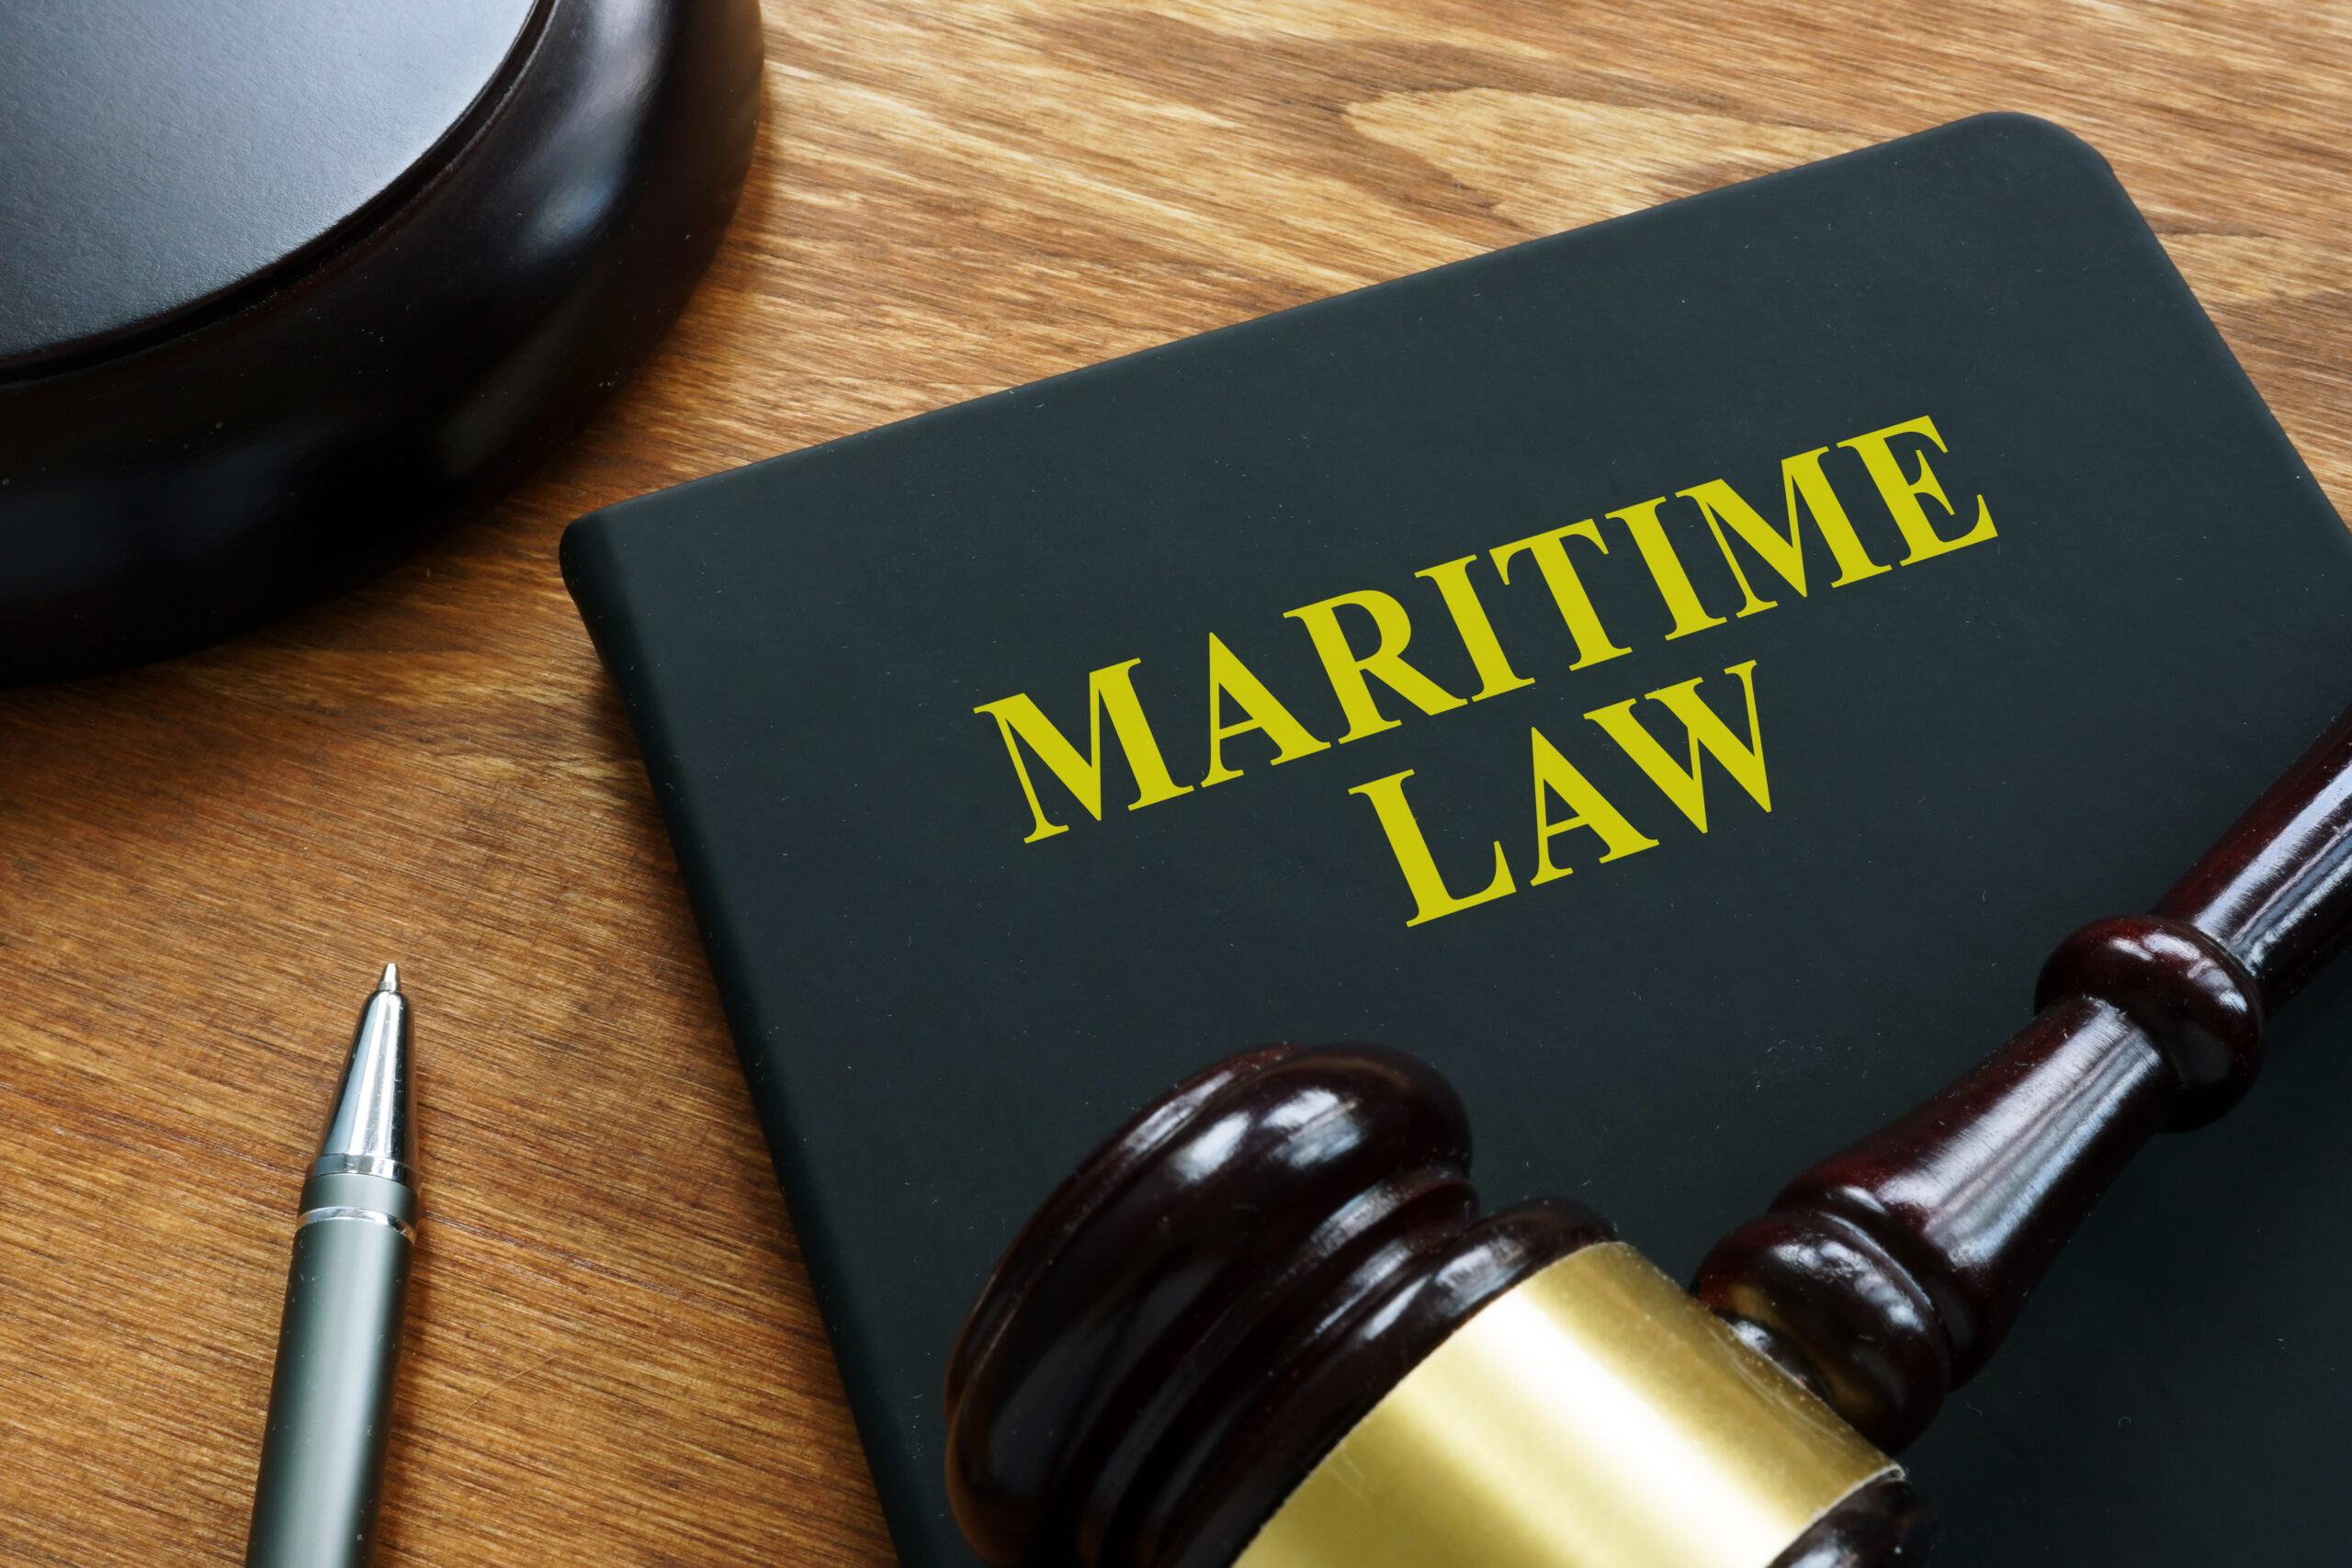 voyage charter maritime law